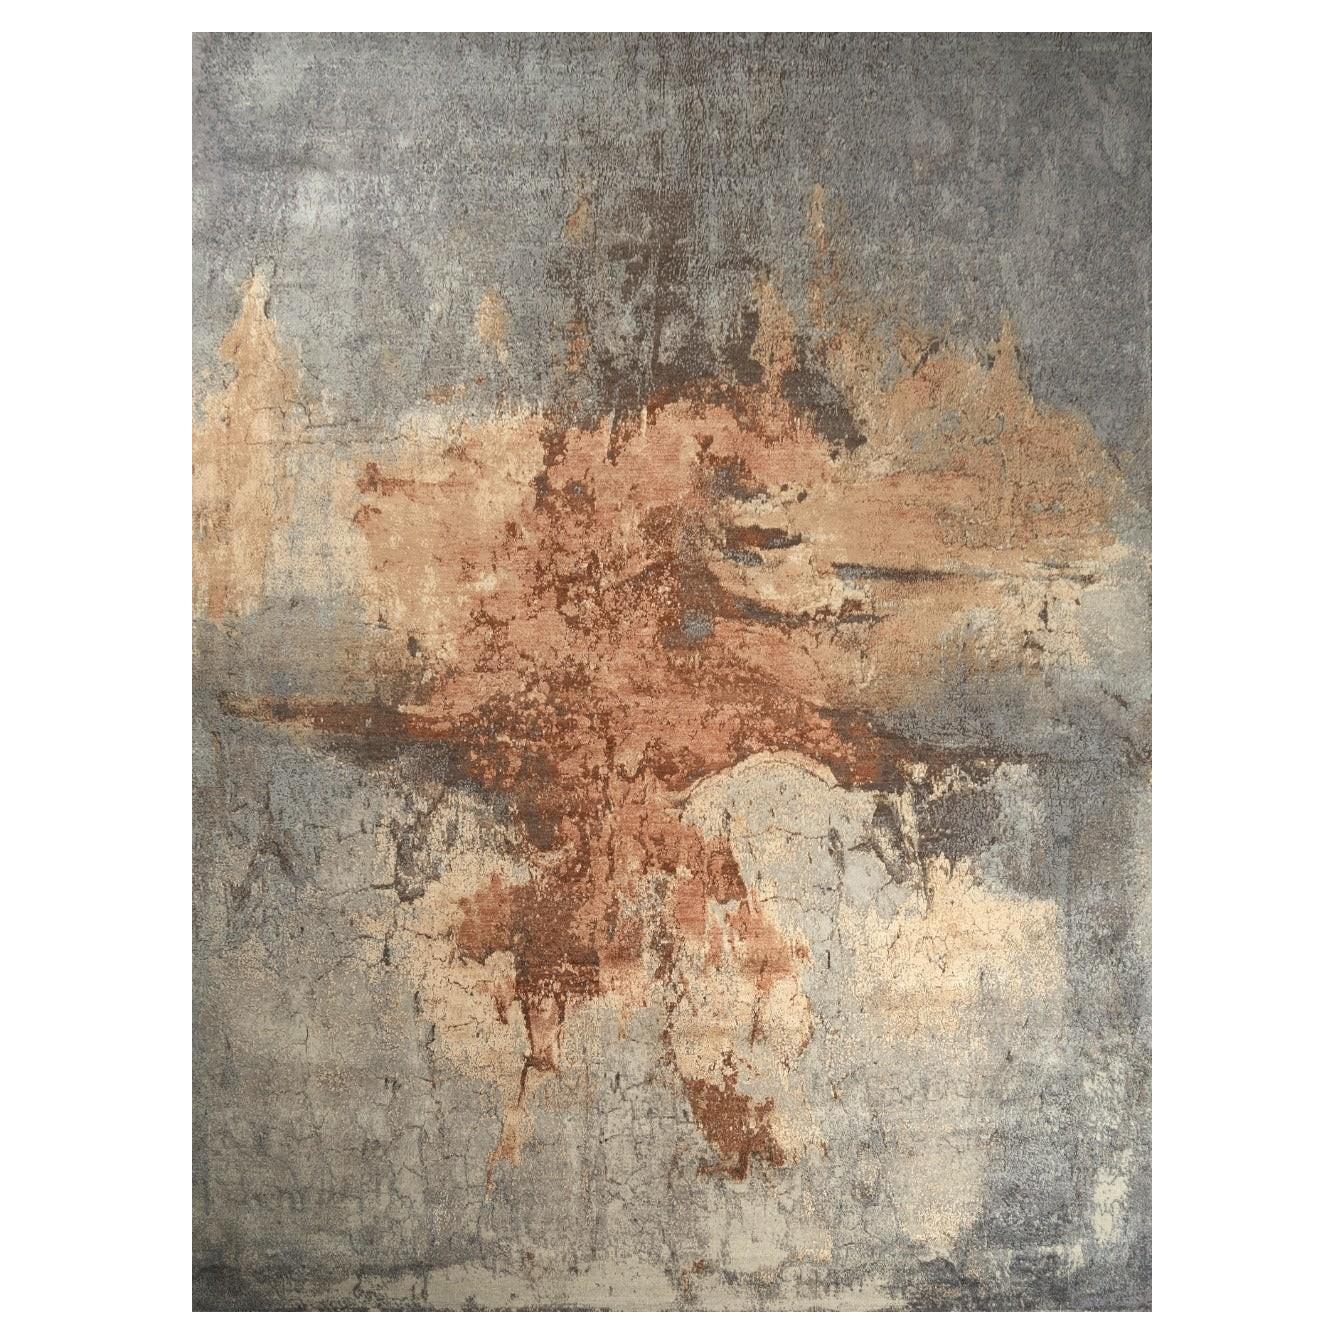 New Modern Abstract Design Wool and Silk Rug